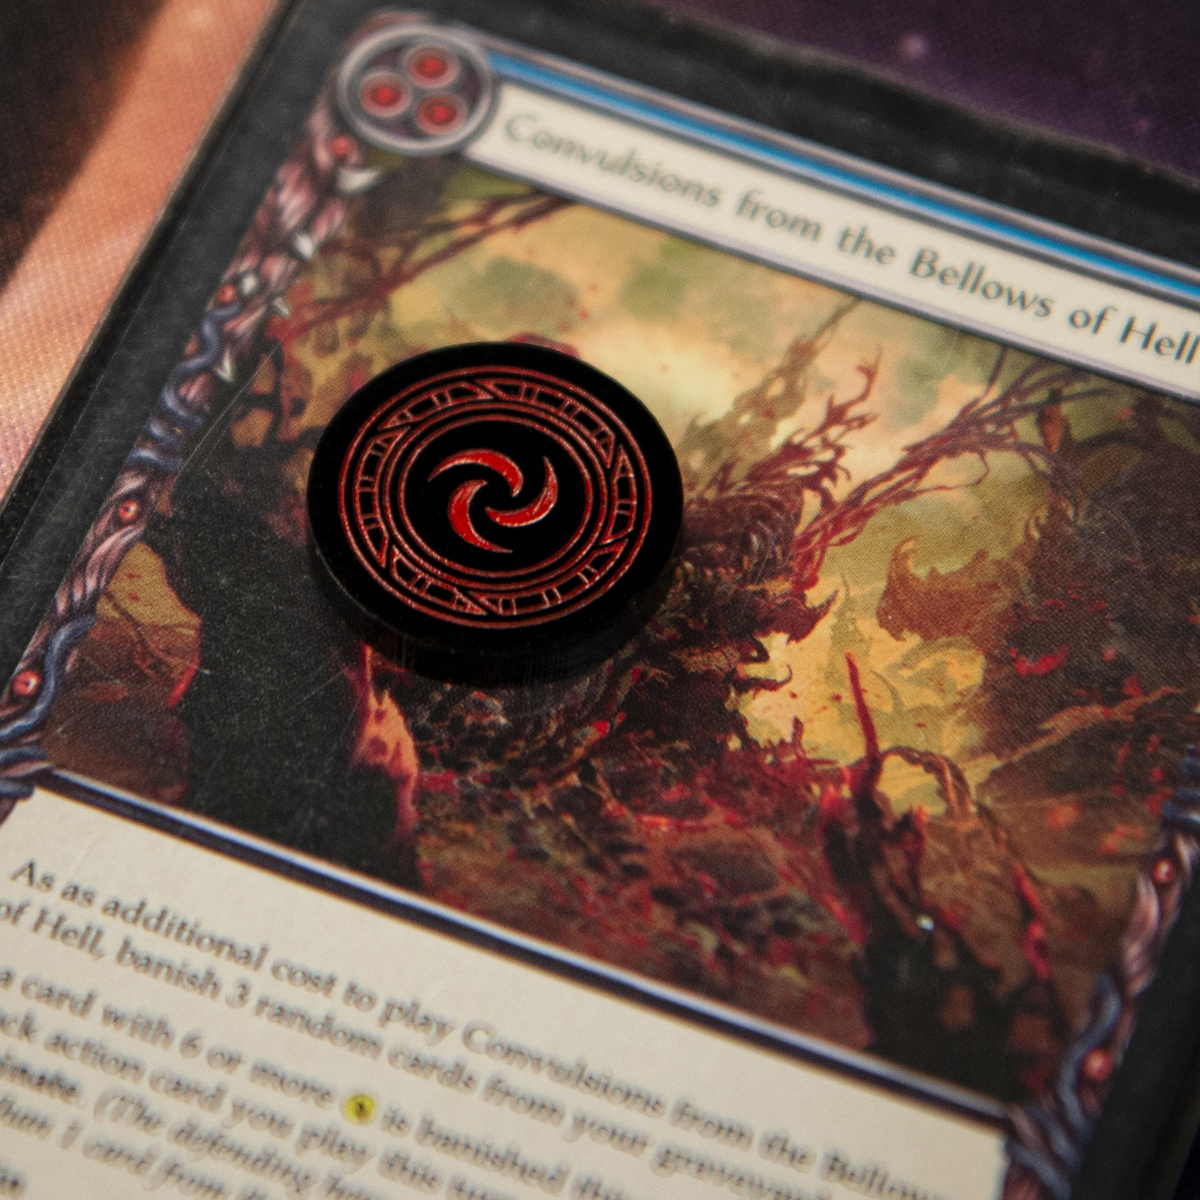 Close up of a single Resource Token on top of the Flesh and Blood TCG card, Convulsions from the Bellows of Hell (Blue)